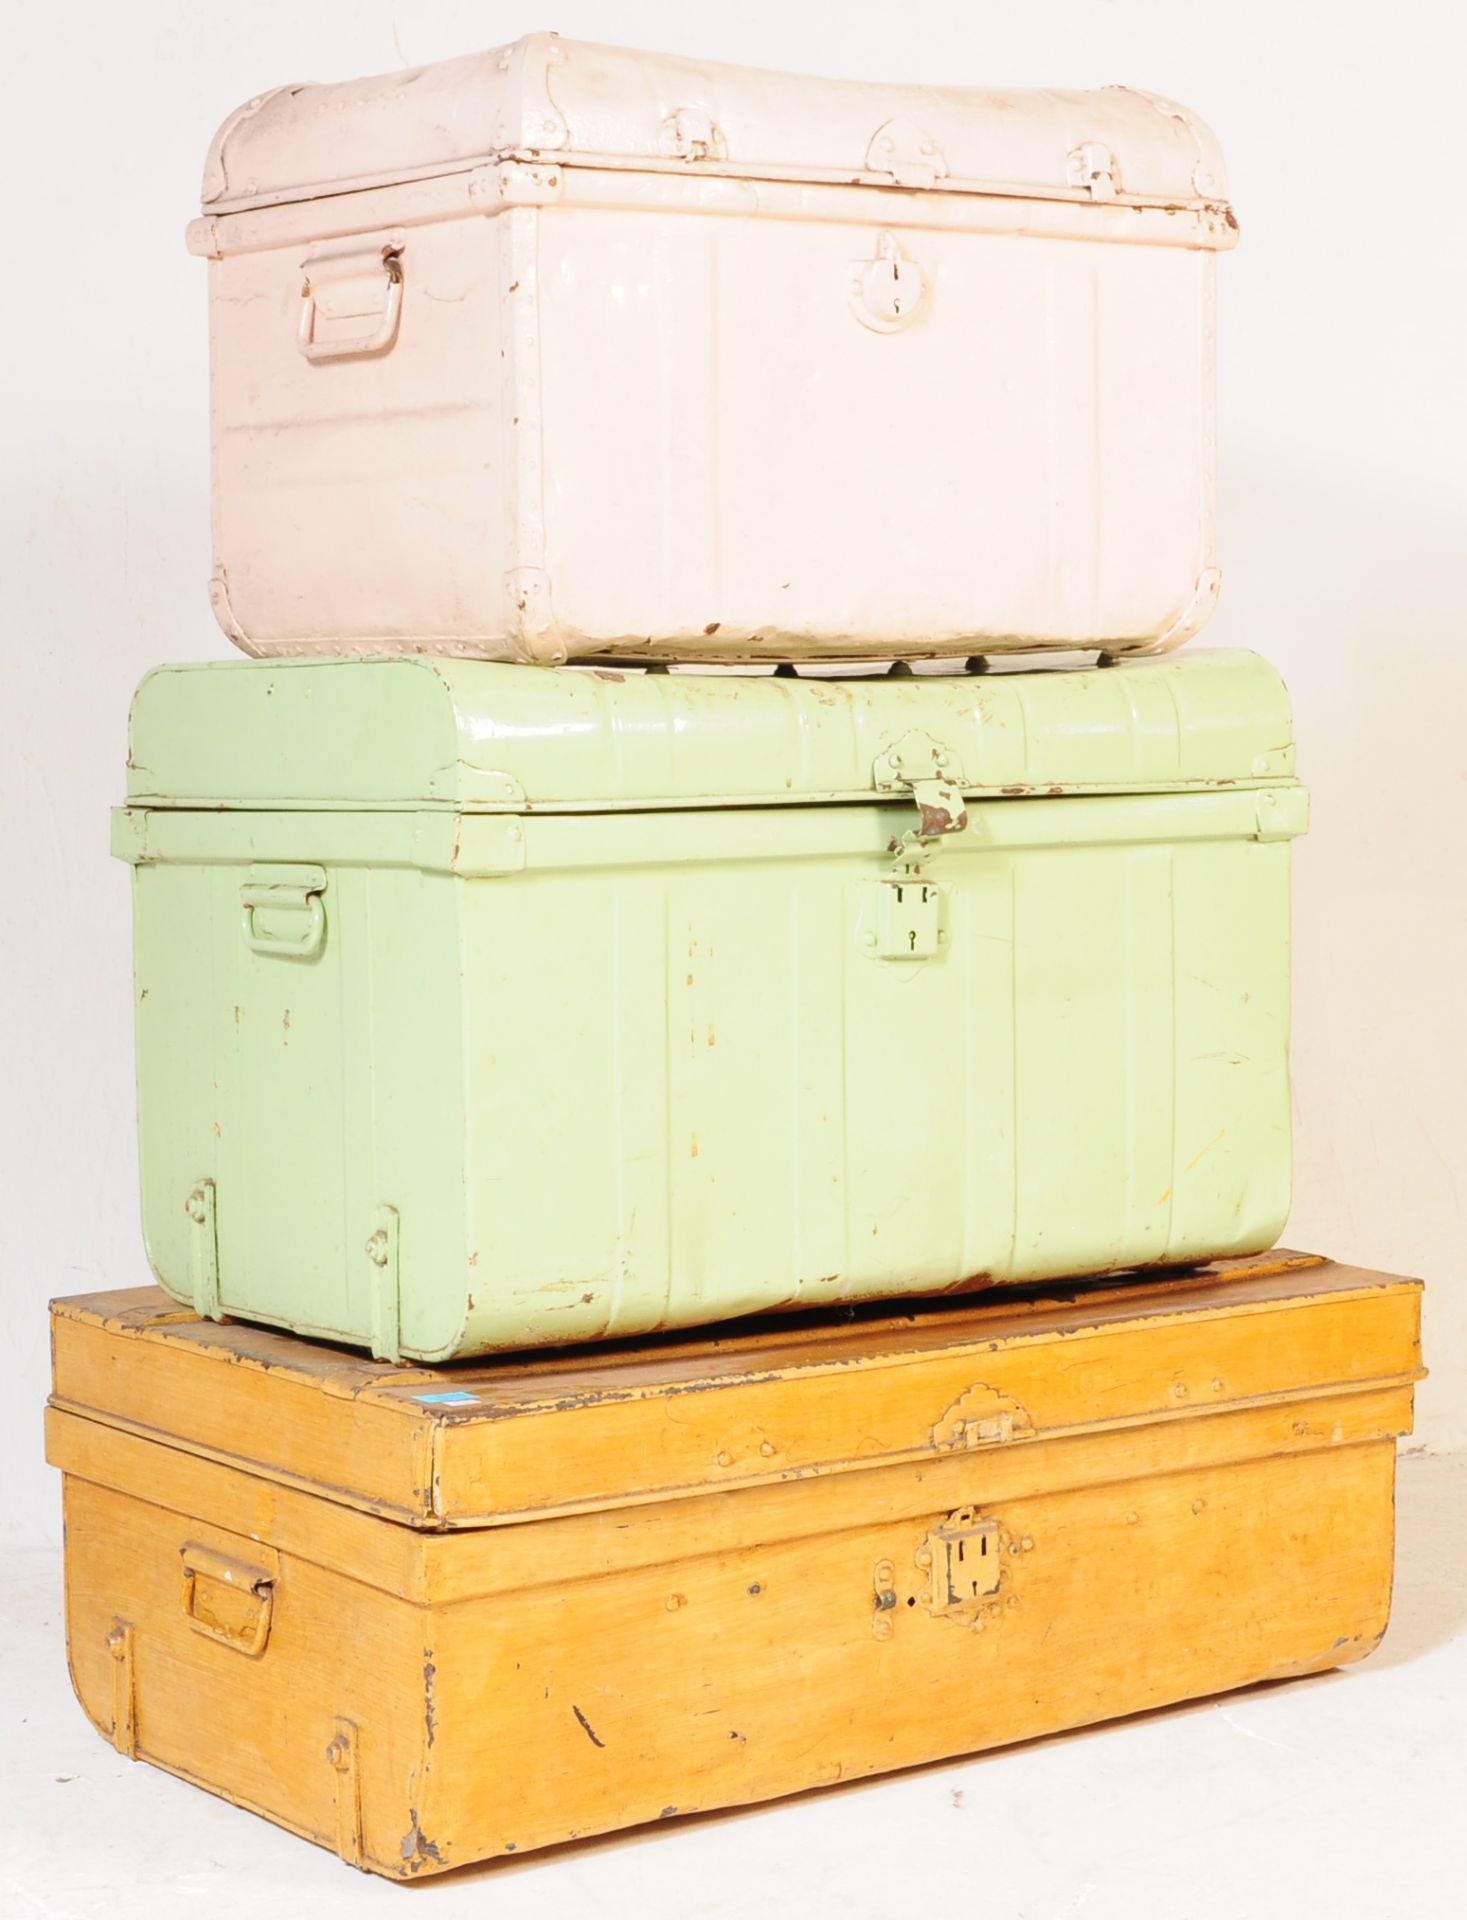 THREE METAL TRUNKS / CASES COMPLETE WITH HANDLES - Image 2 of 5